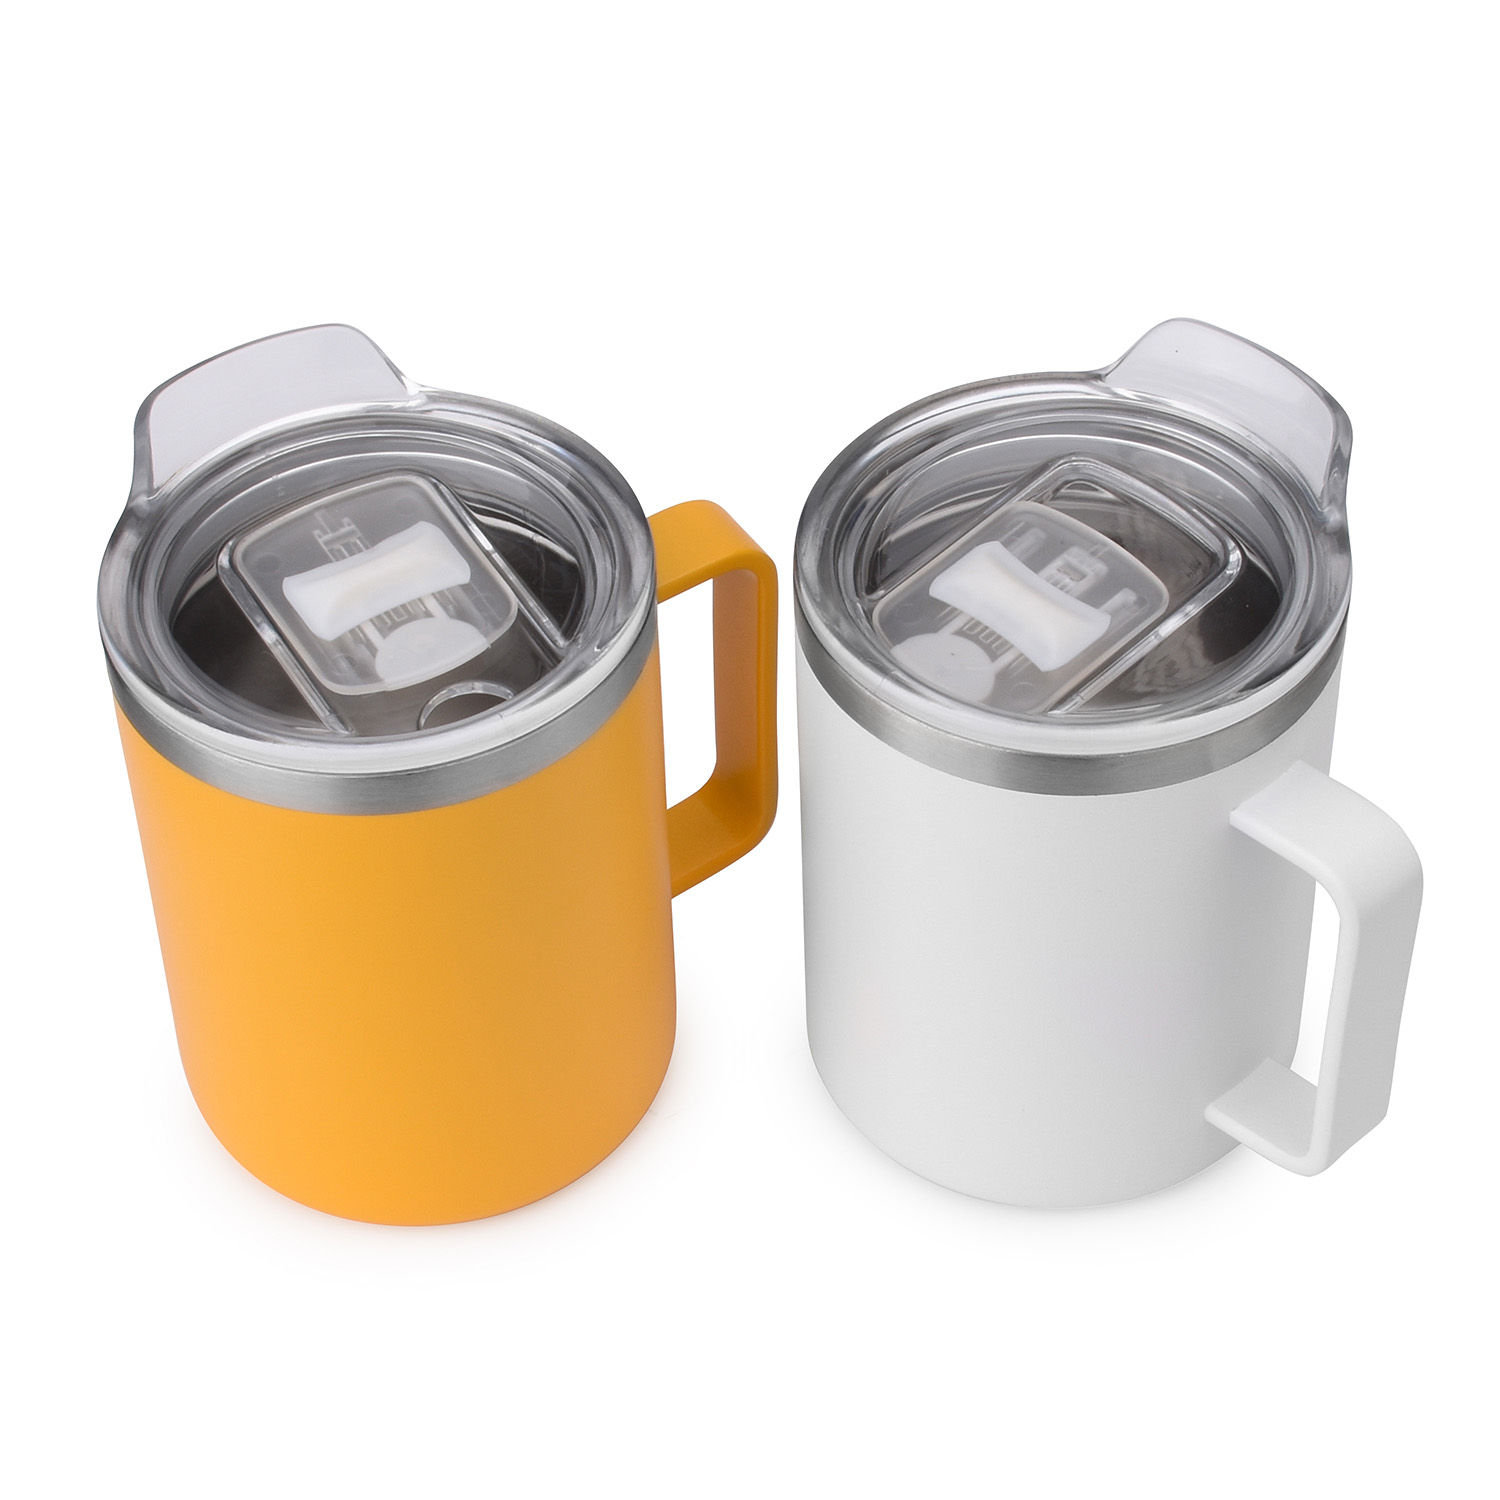 https://www.waterbottle.tech/wp-content/uploads/2019/10/insulated-stainless-steel-mug-with-handle-and-clear-lid-s6112f1-4.jpg